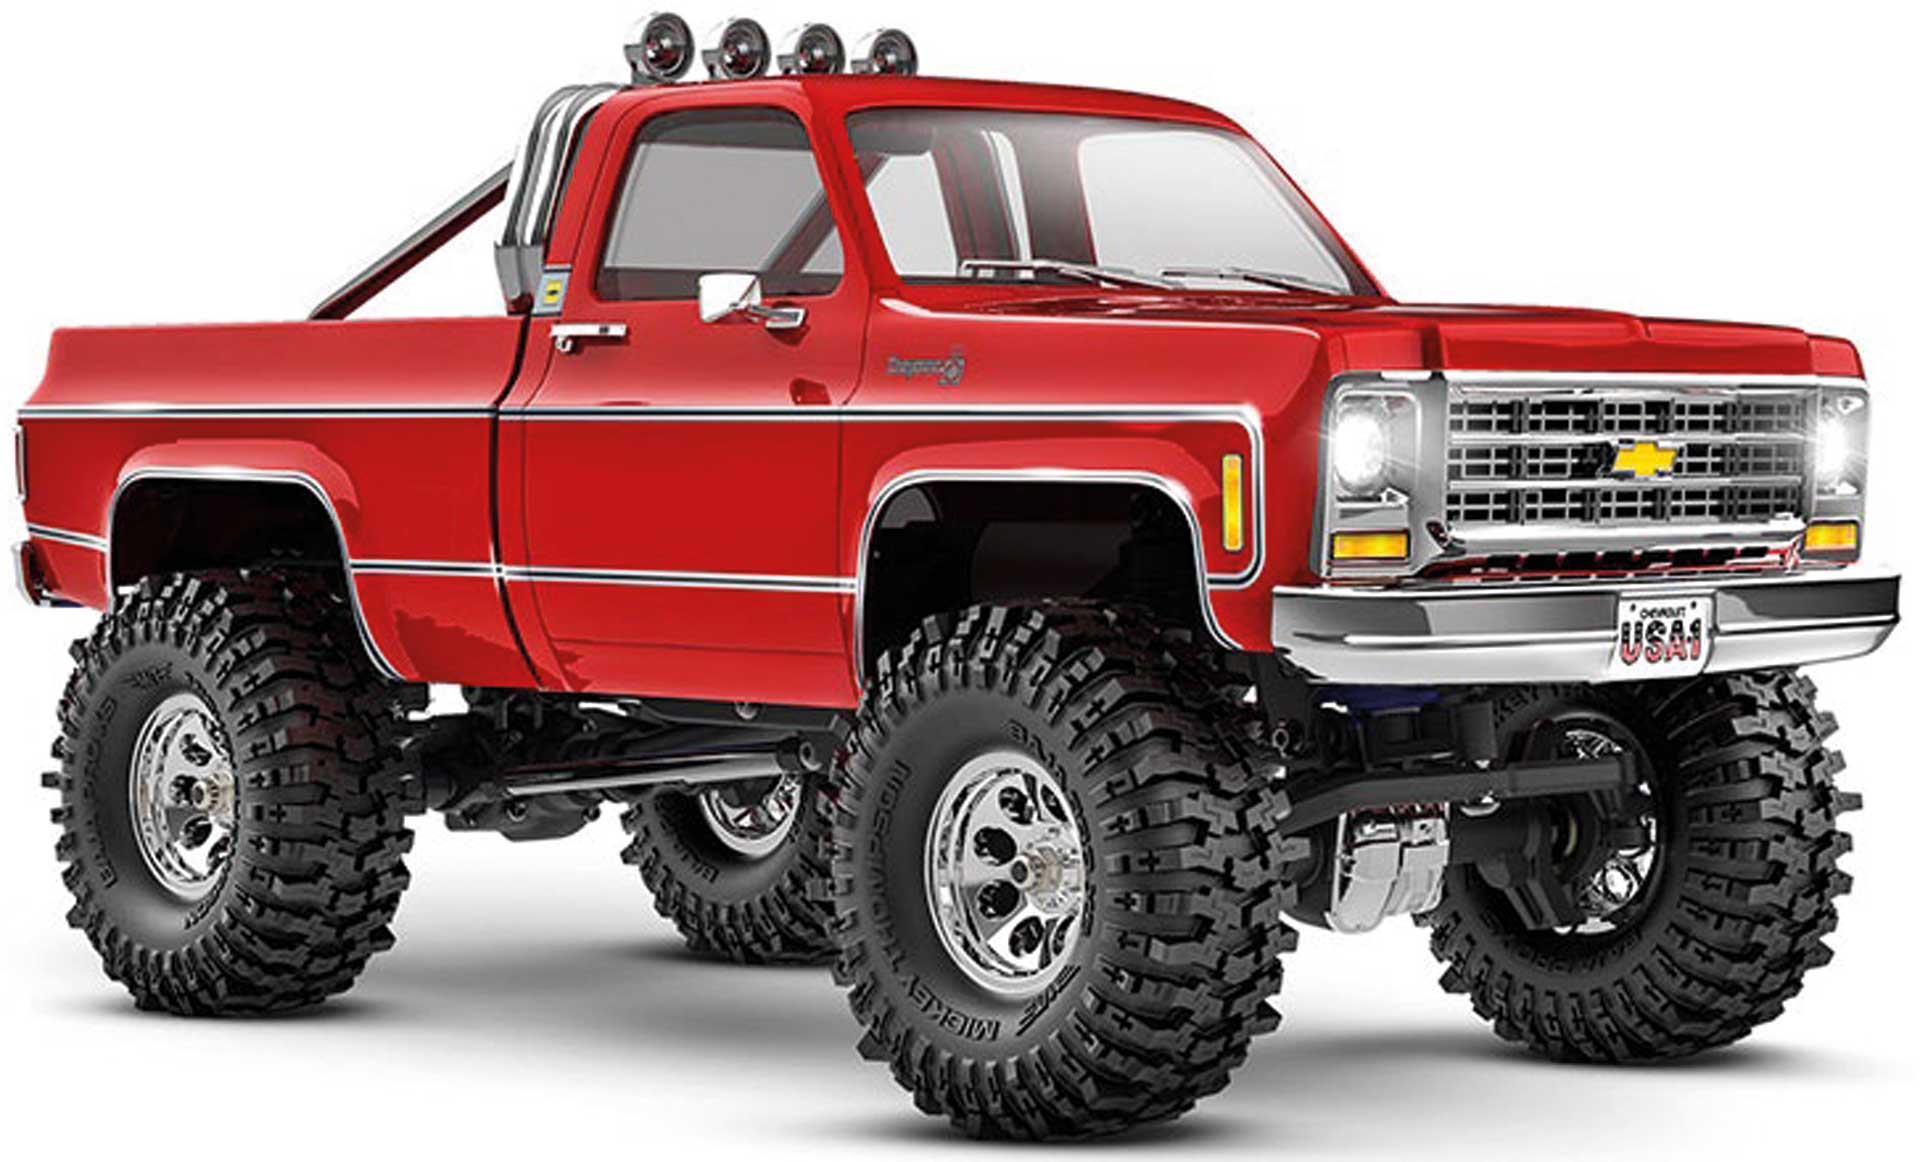 TRAXXAS TRX-4M 79 CHEVY K10 4X4 LIFTED ROUGE 1/18 CRAWLER RTR BRUSHED, AVEC ACCU ET CHARGEUR USB